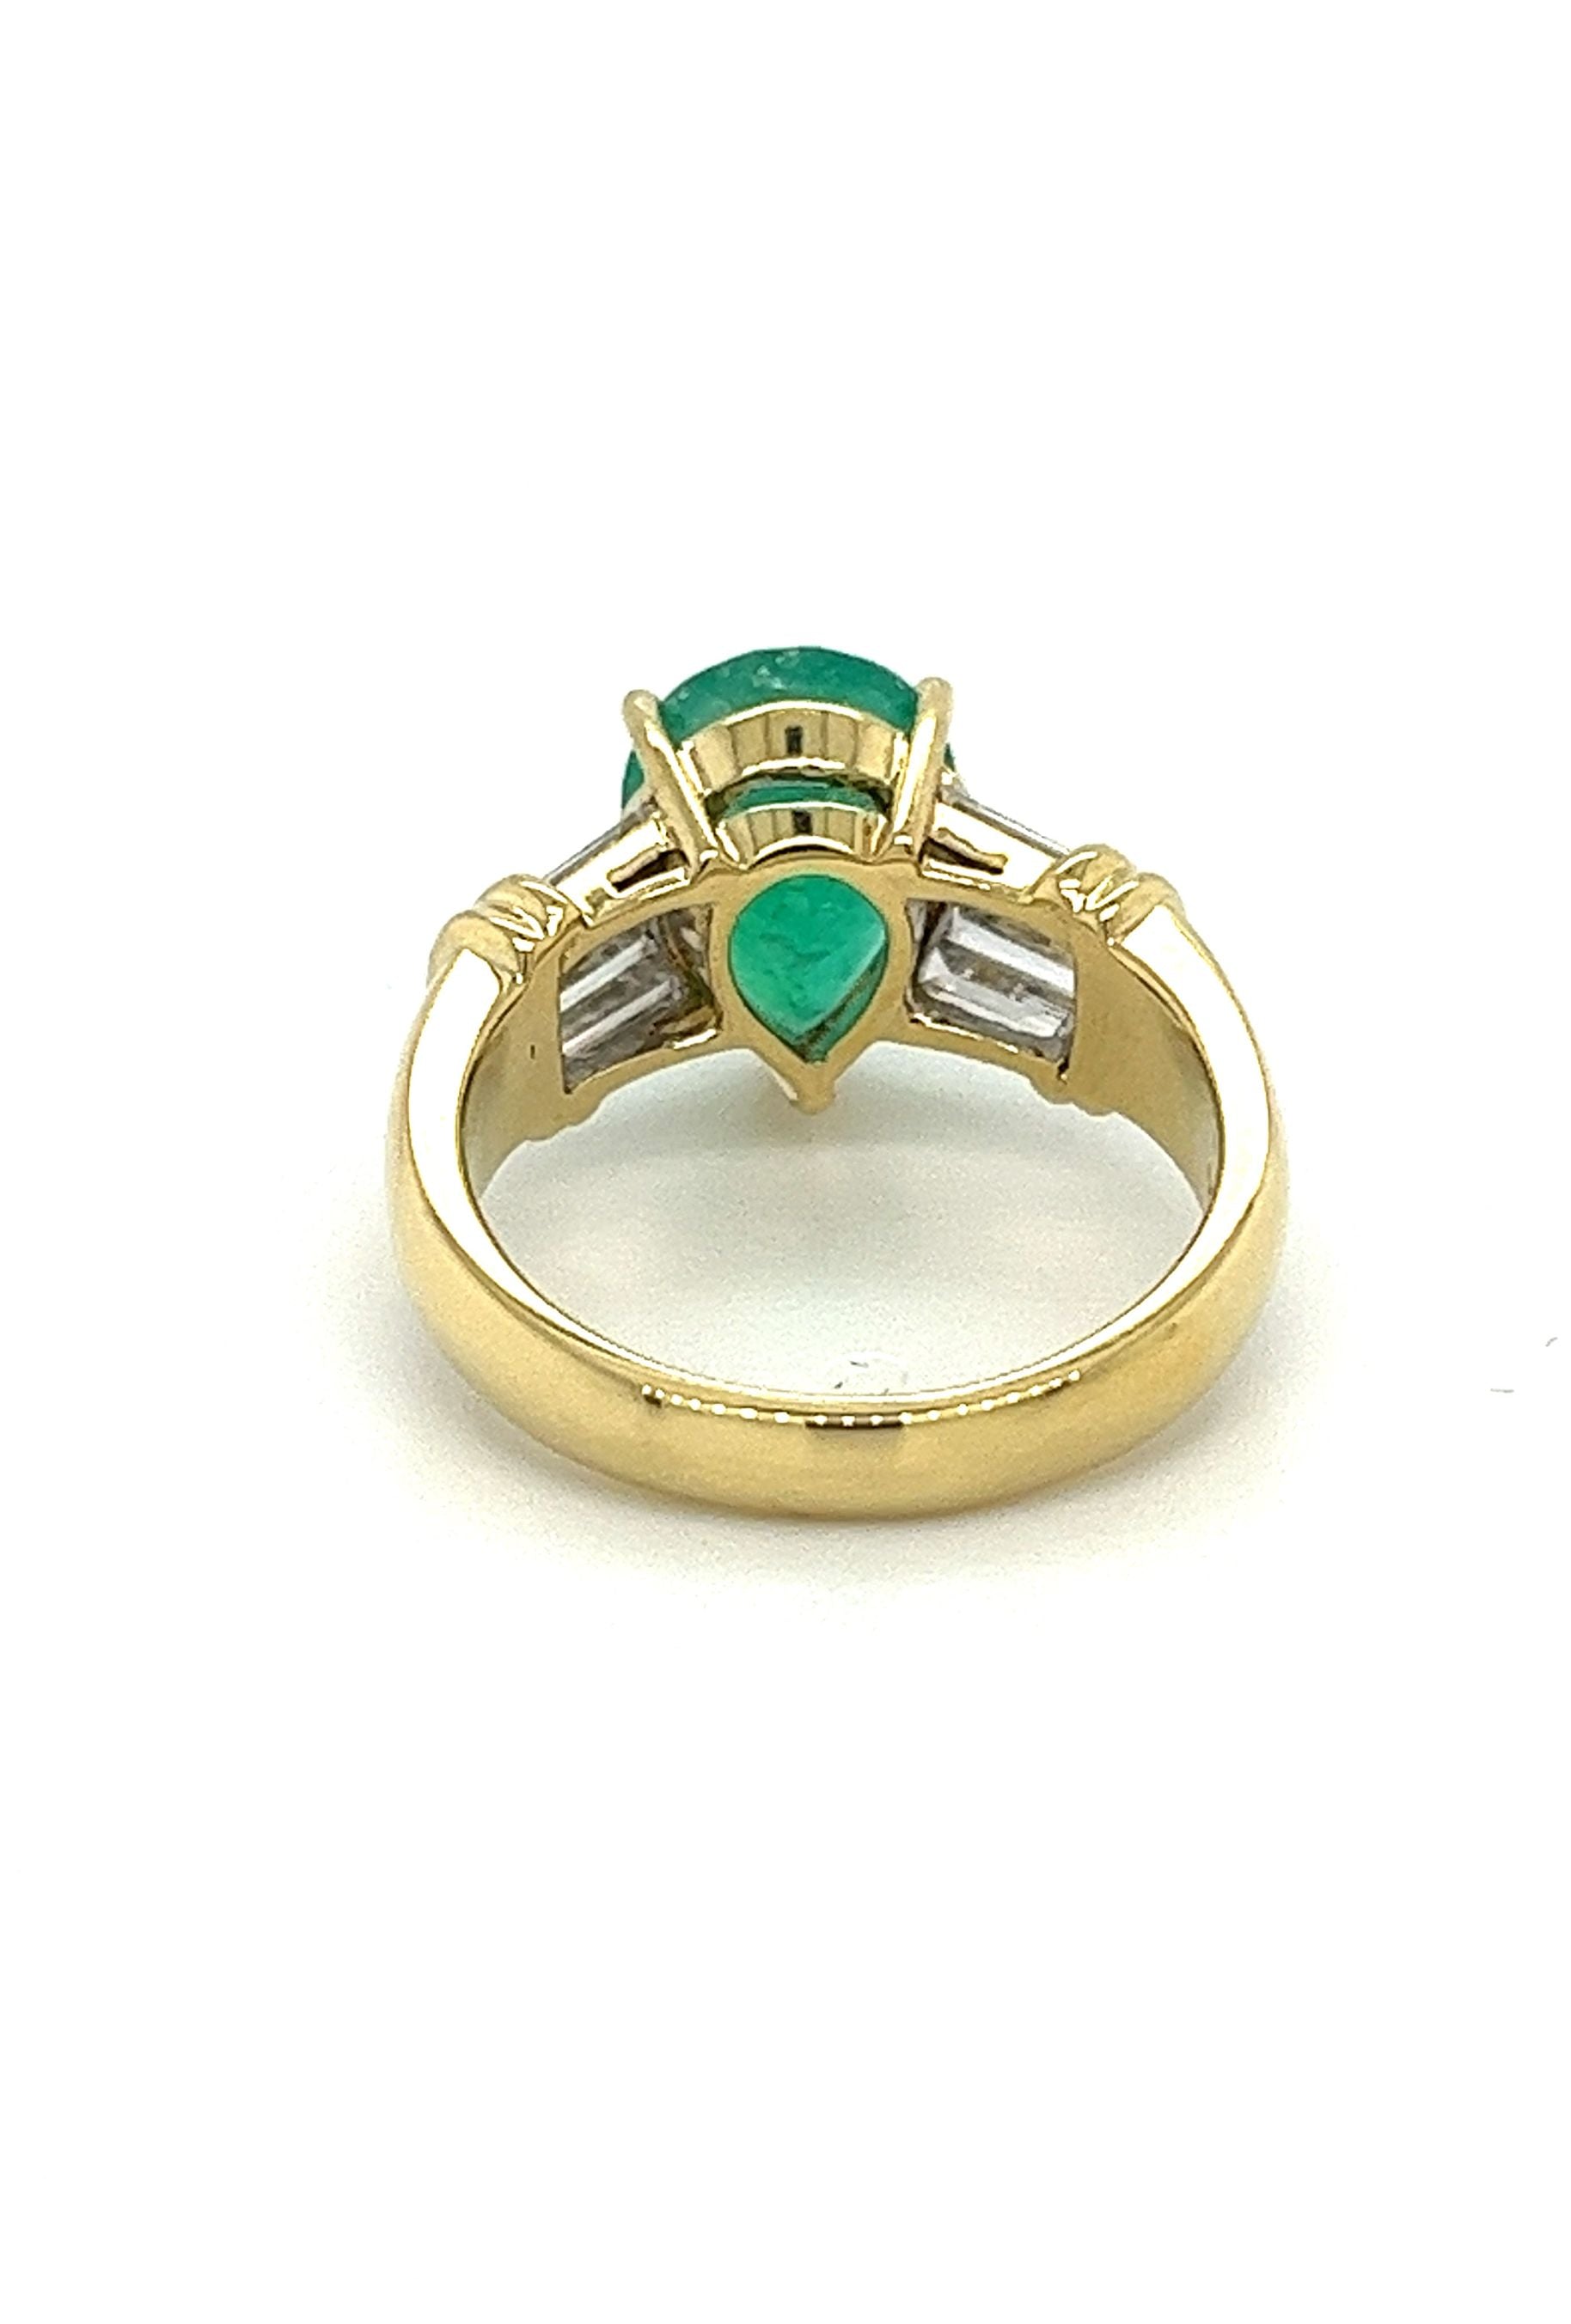 Natural-3_22-Carat-Pear-Cut-Colombian-Emerald-With-Baguette-Diamond-Side-Stone-Ring-Rings-2.jpg